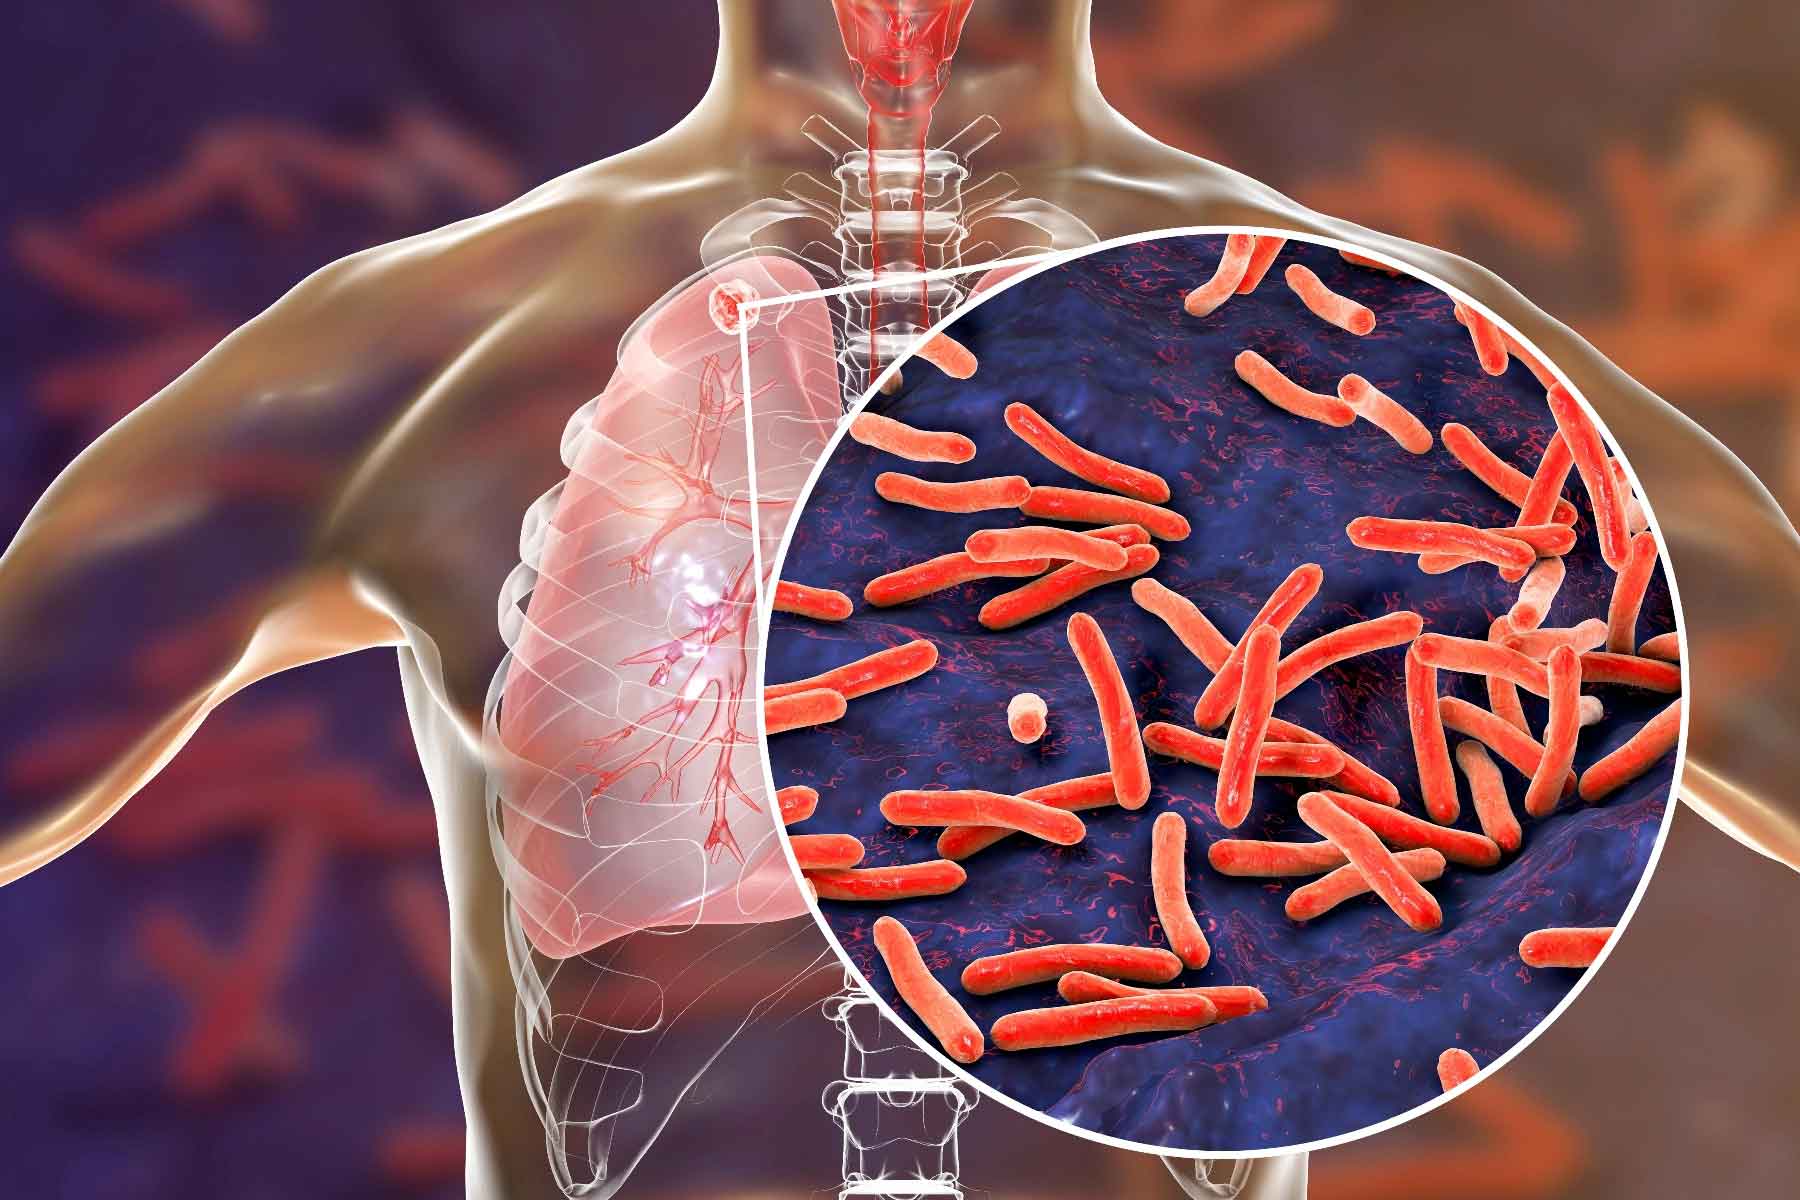 What is tuberculosis?